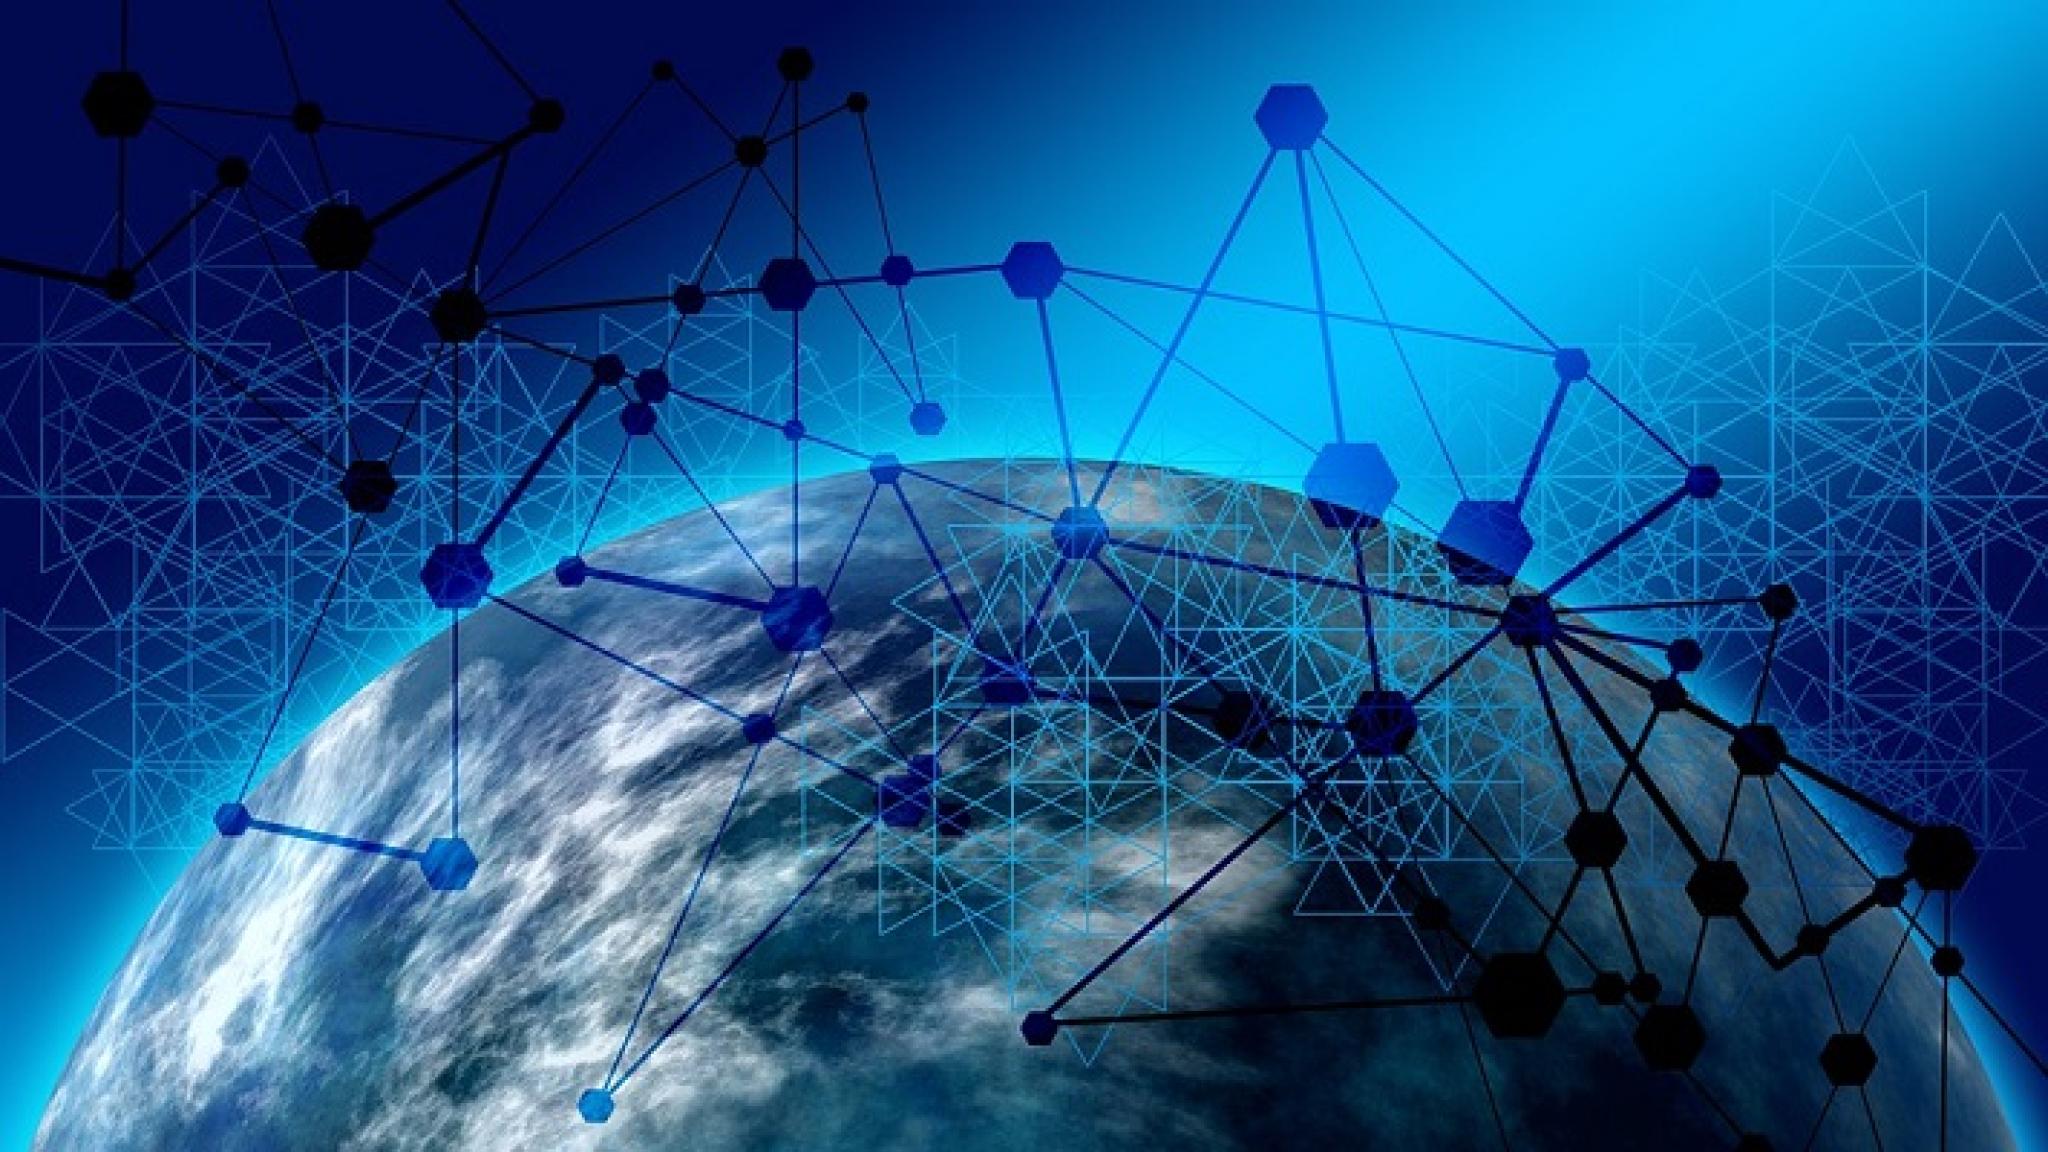 Abstract image of networked globe from https://www.maxpixel.net/photo-6247355 (CC0) https://creativecommons.org/publicdomain/zero/1.0/ 